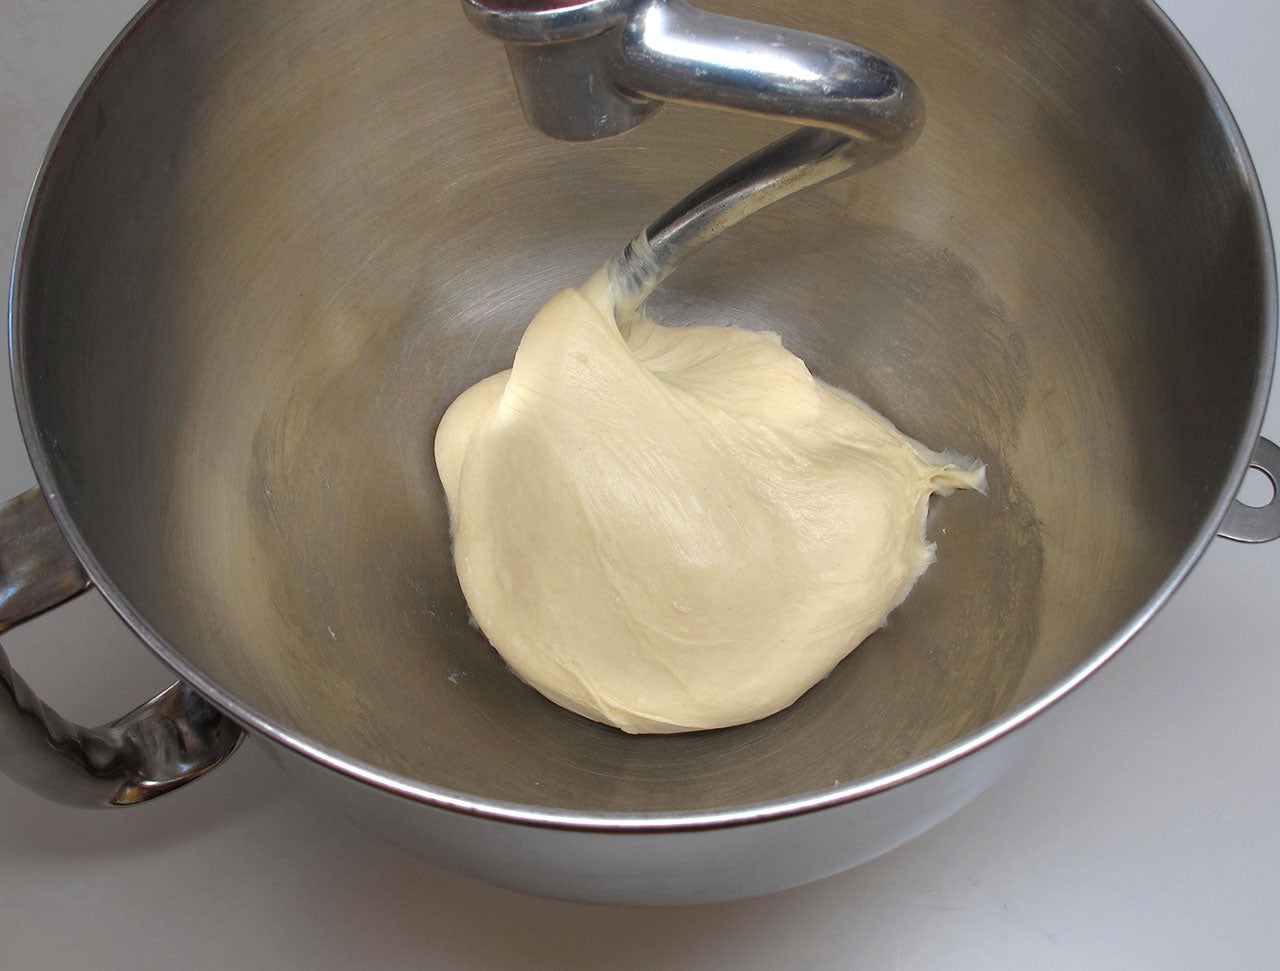 Mixing the cinnamon roll dough in a mixer